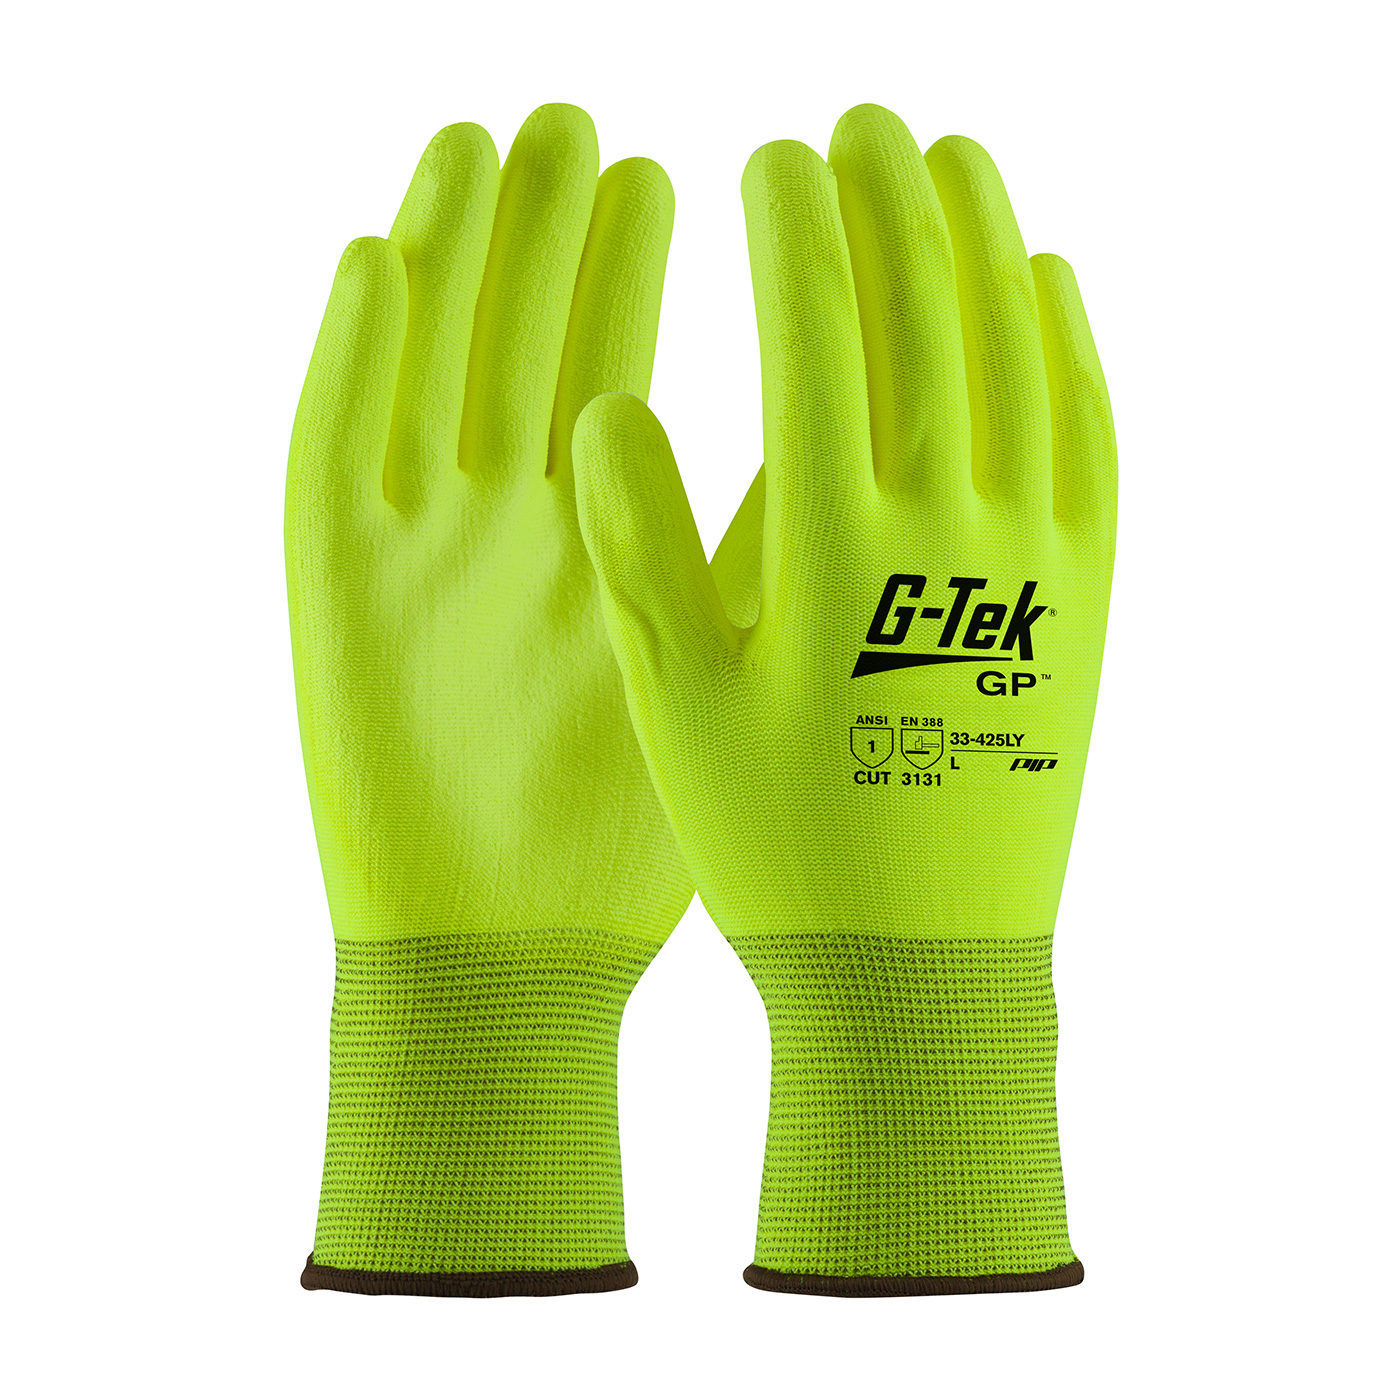 PIP 33-425LY/S G-Tek GP Hi-Vis Seamless Knit Polyester Glove with Polyurethane Coated Smooth Grip on Palm & Fingers - Small PID-33 425LY S